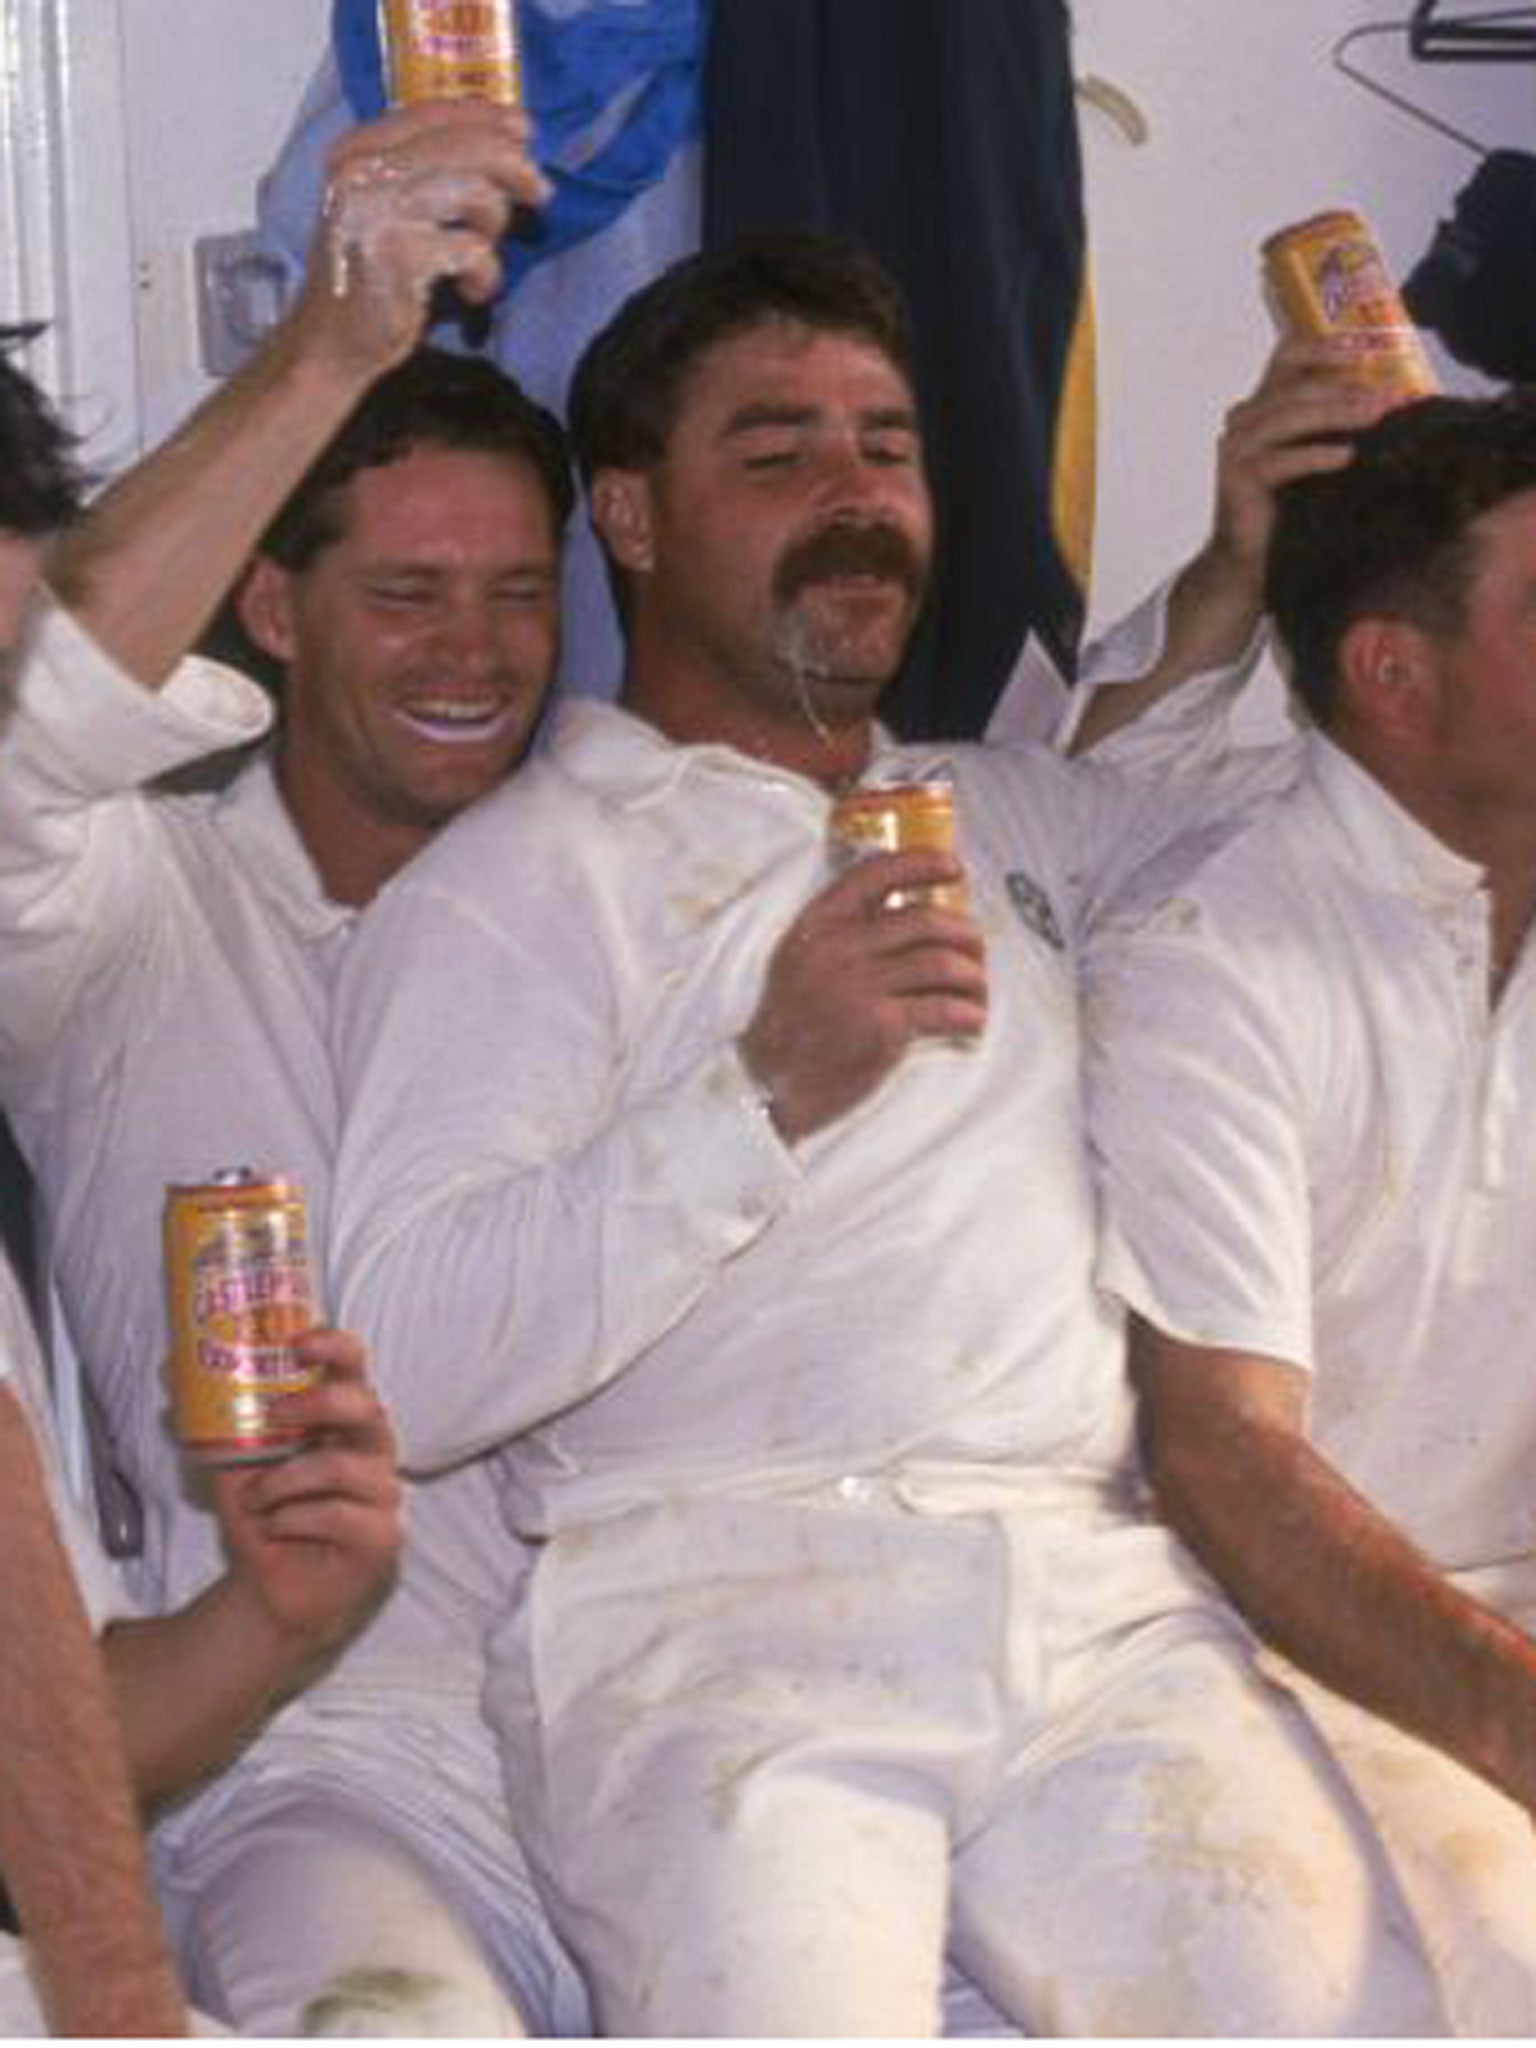 David Boon, centre, enjoyed a couple of drinks on the 1989 tour